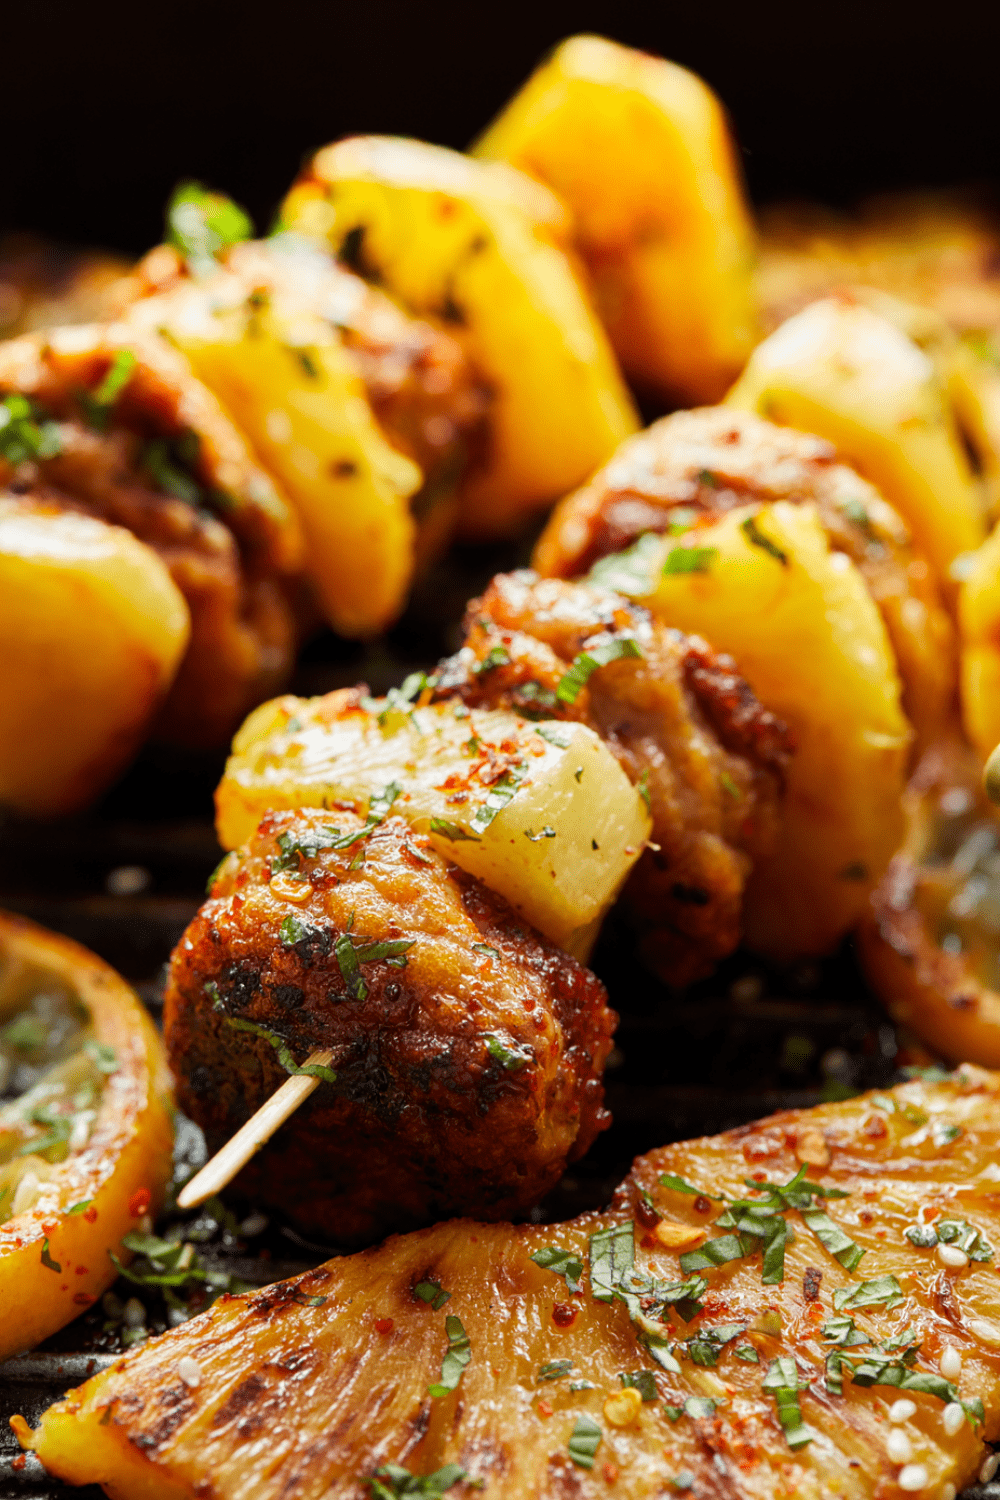 Grilled skewers with pineapple and chicken